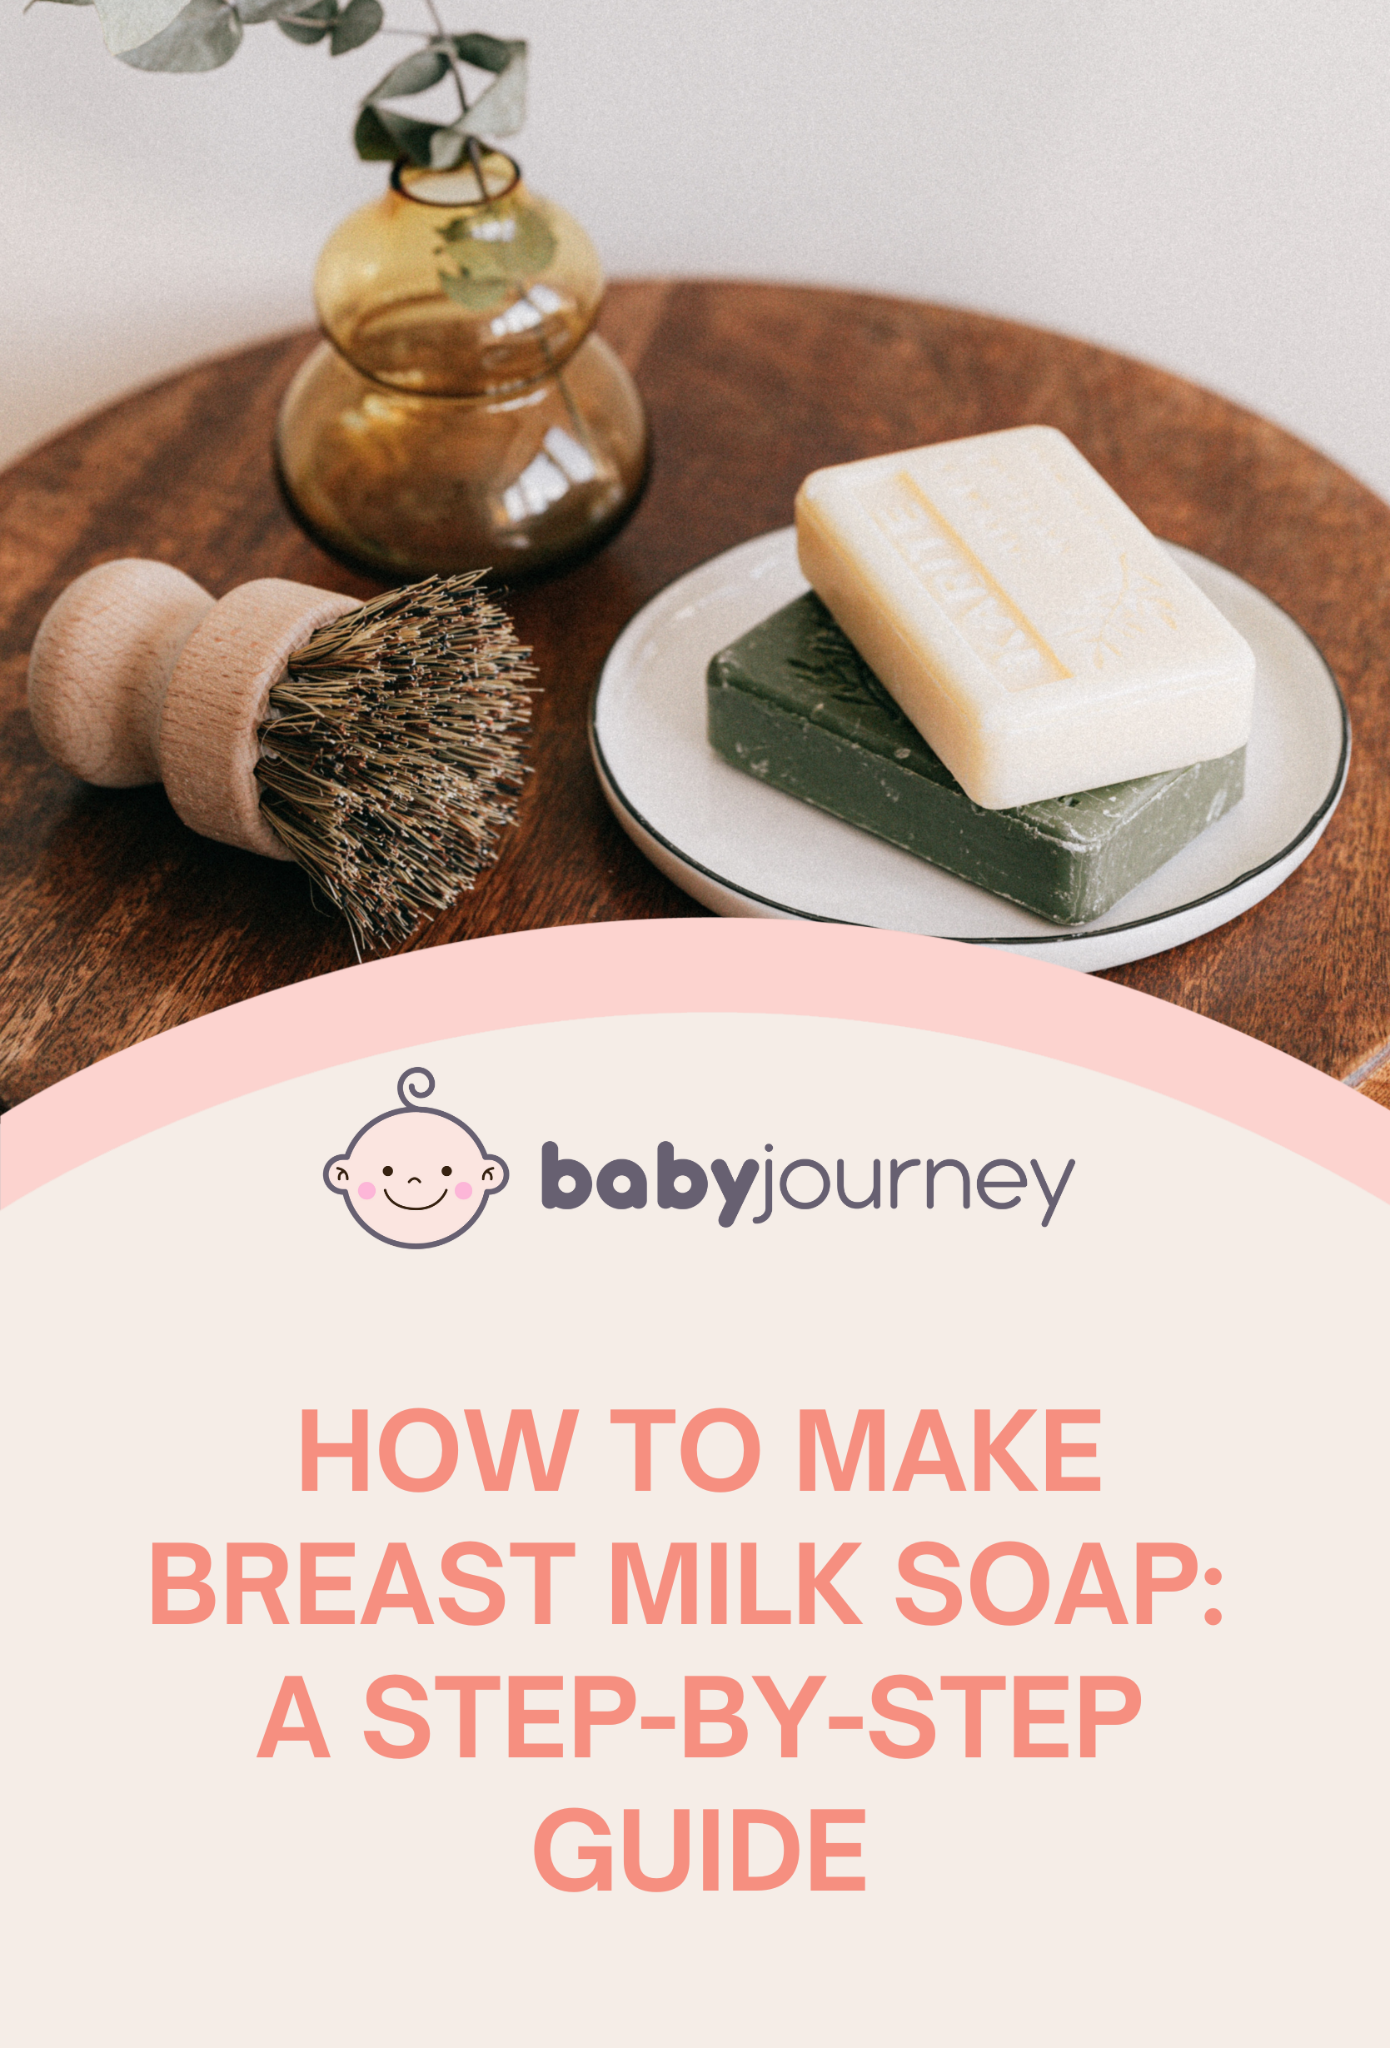 How to Make Breast Milk Soap Pinterest - Baby Journey